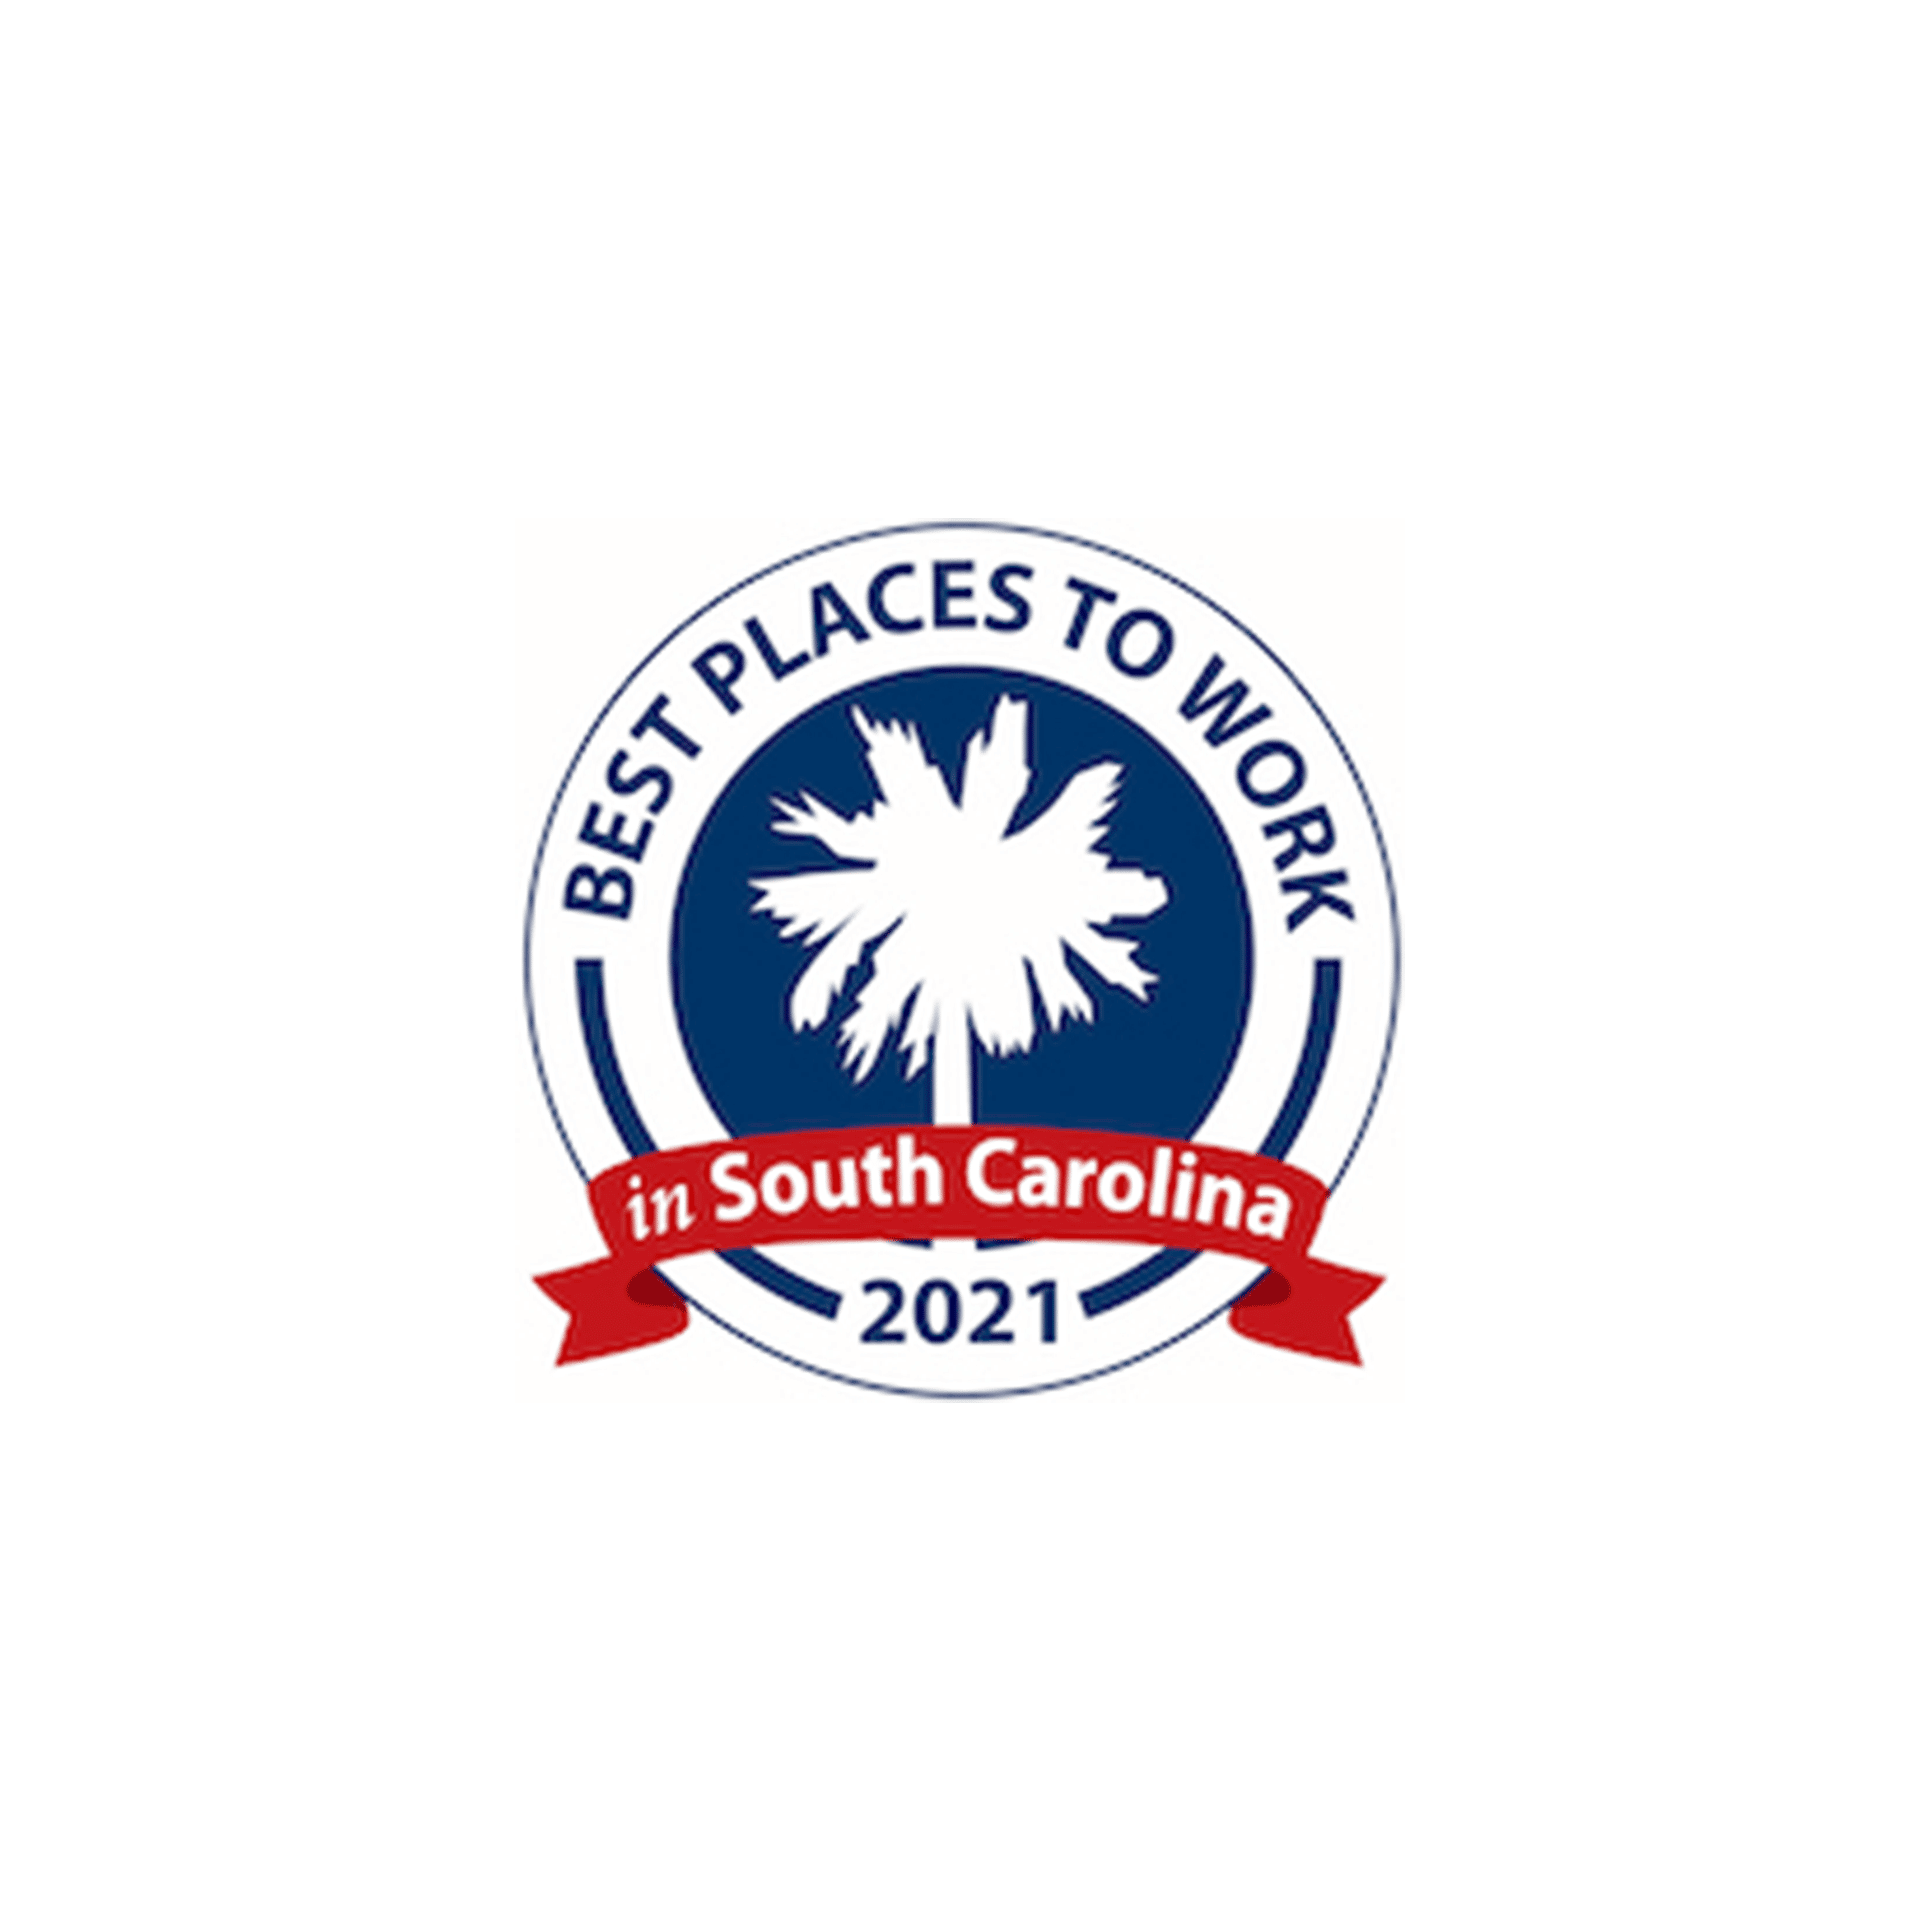 FUEL Named one of the Best Places to Work in South Carolina